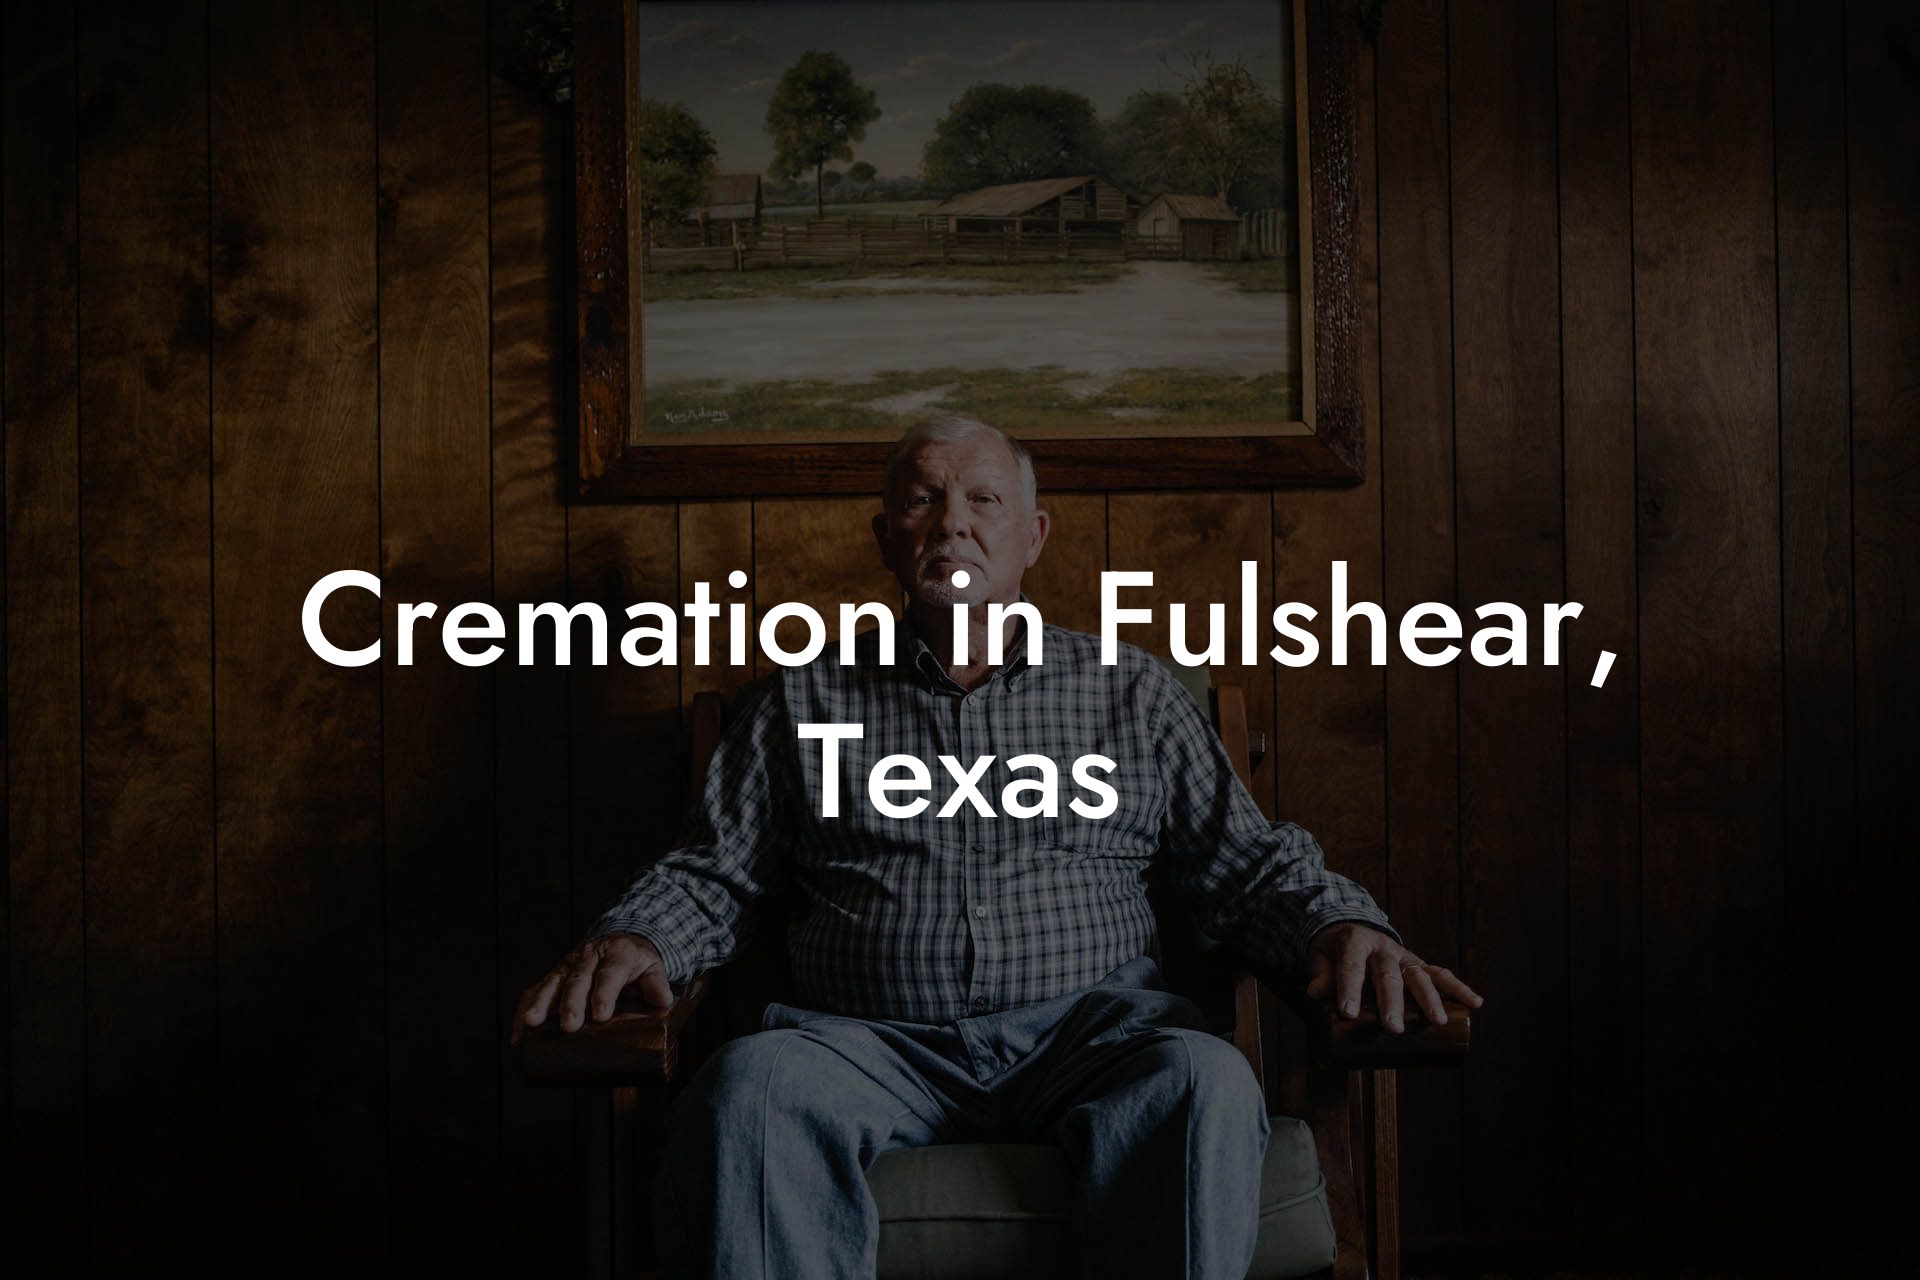 Cremation in Fulshear, Texas